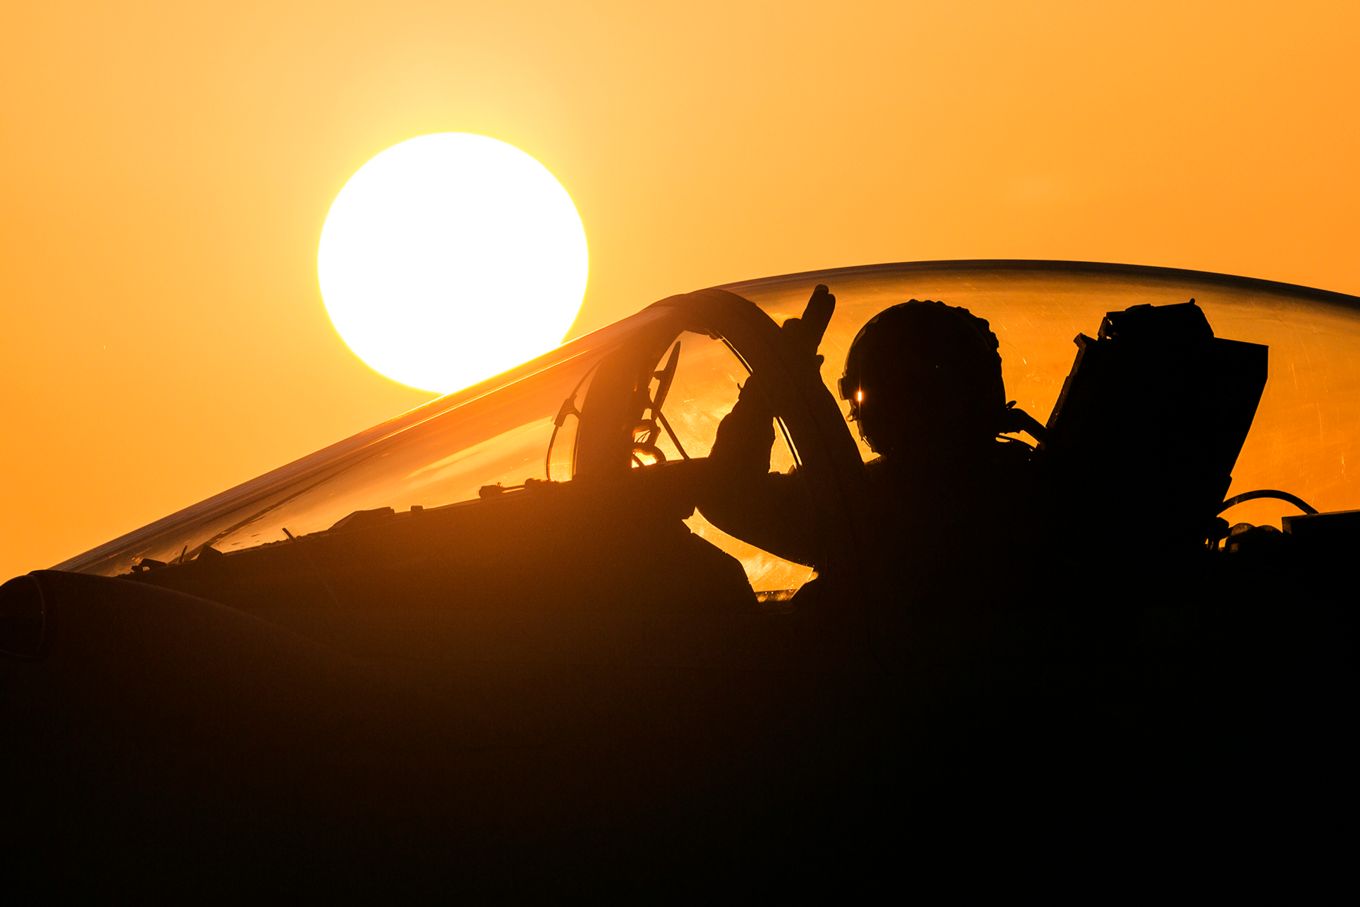 Pilot waves from aircraft with sunset background. 